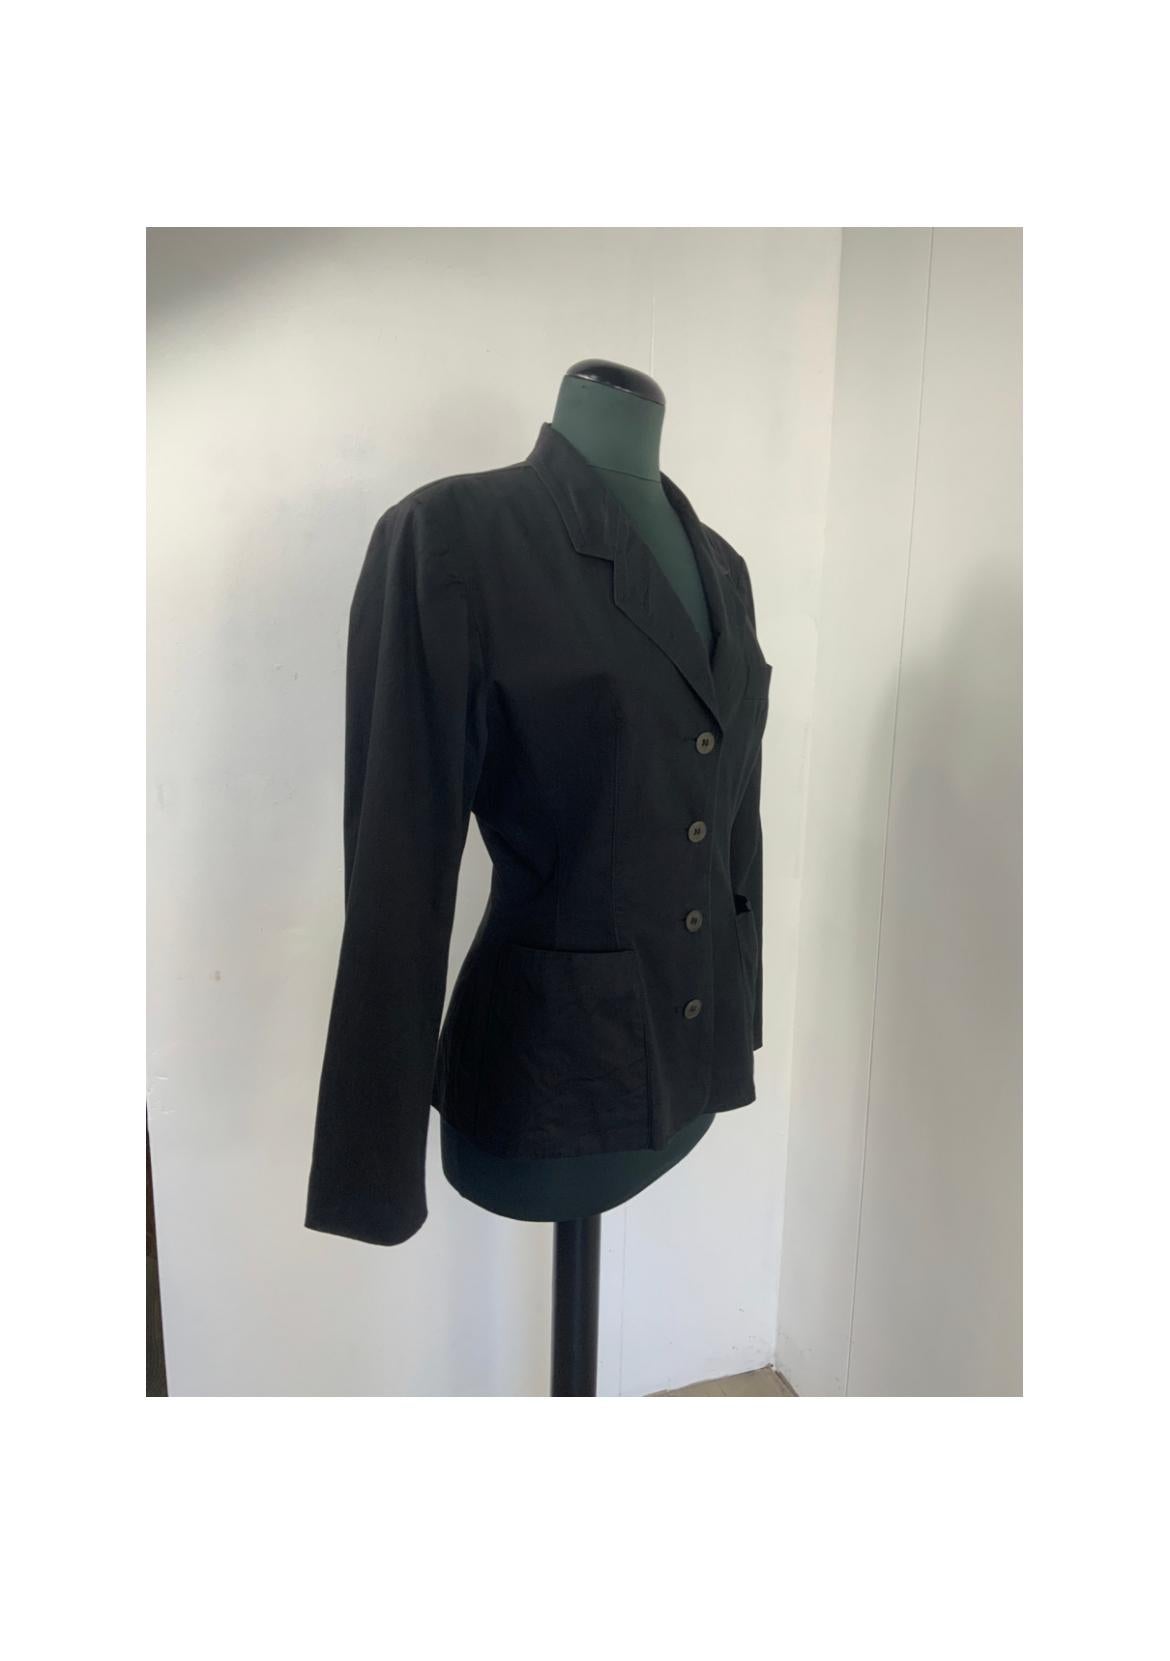 JEAN PAUL GAULTIER JUNIOR JACKET.
In cotton. Lined.
He was born as a Junior boss but wears an Italian 40/42.
It has padded shoulder straps.
Shoulders 46 cm
Bust 48 cm
Waist 38 cm
Length 68 cm
Excellent general condition shows signs of normal use